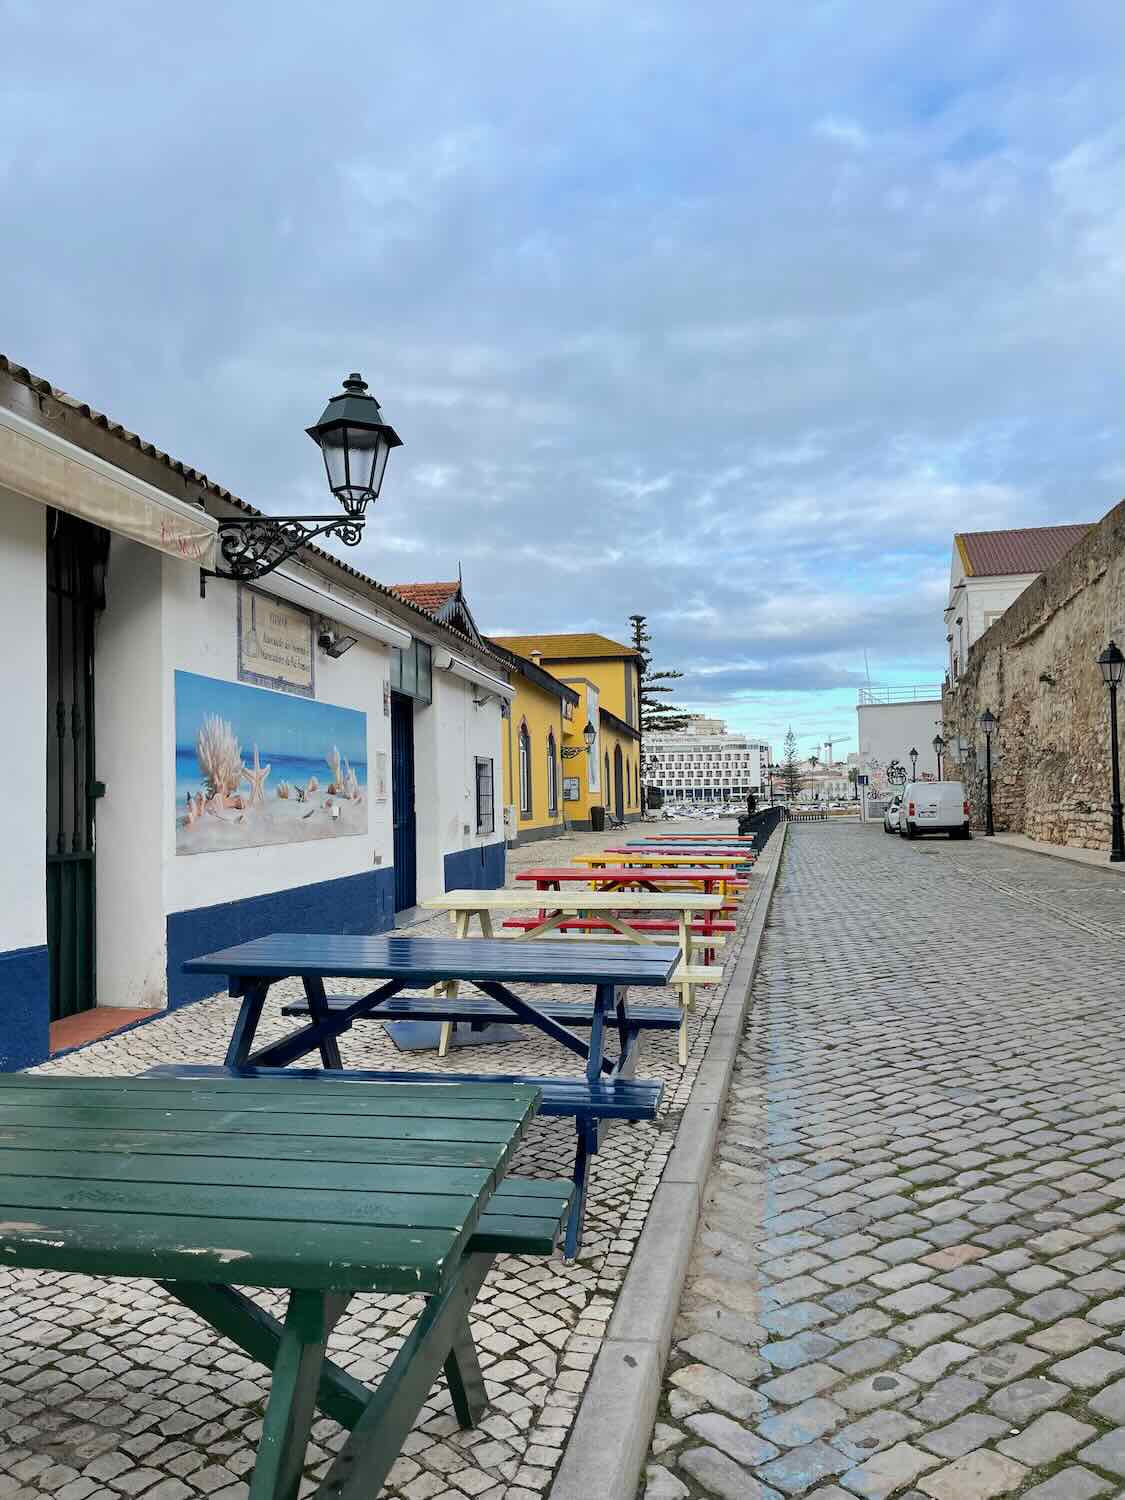 Colorful picnic benches on a cobblestone sidewalk in downtown Faro, with a blue and white tiled mural on the wall of a building, offering a quaint and inviting outdoor seating area.